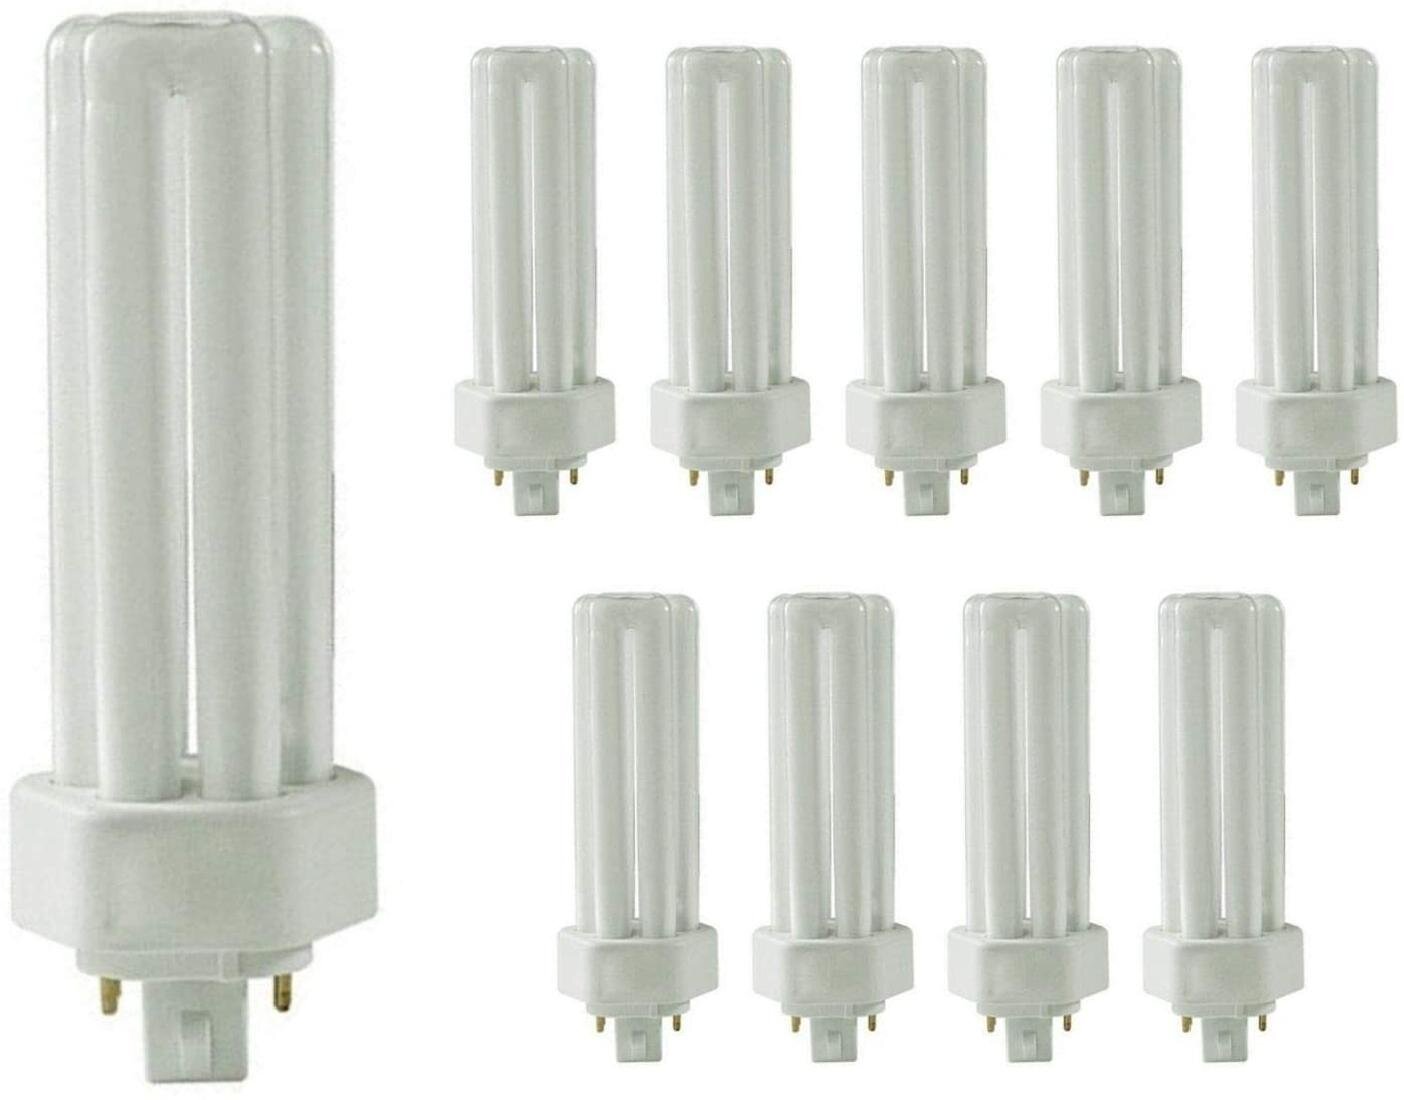 10 Pack Sunlite 2-Pin Fluorescent 5W 2700K Warm White U Shaped PL CFL Twin Tube Plugin Bulbs with G23 Base 